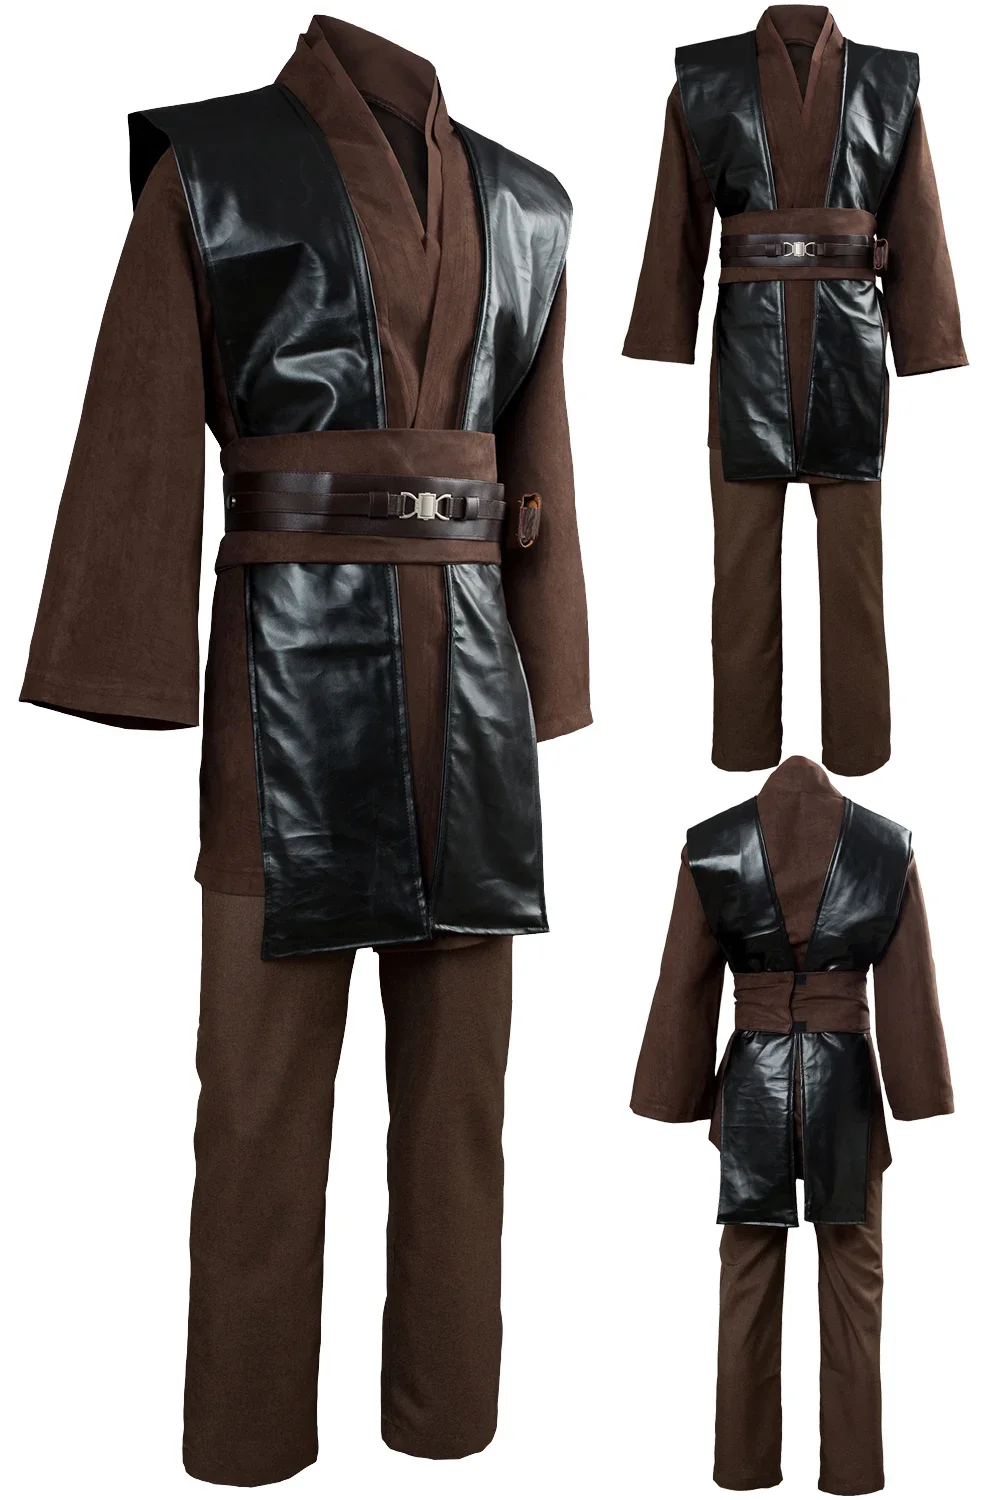 

Young Anakin Cosplay Fantasy Men Costume Movie Space Battle Jedi Knight Roleplay Fantasia Fancy Dress Up Party Cloth For Male